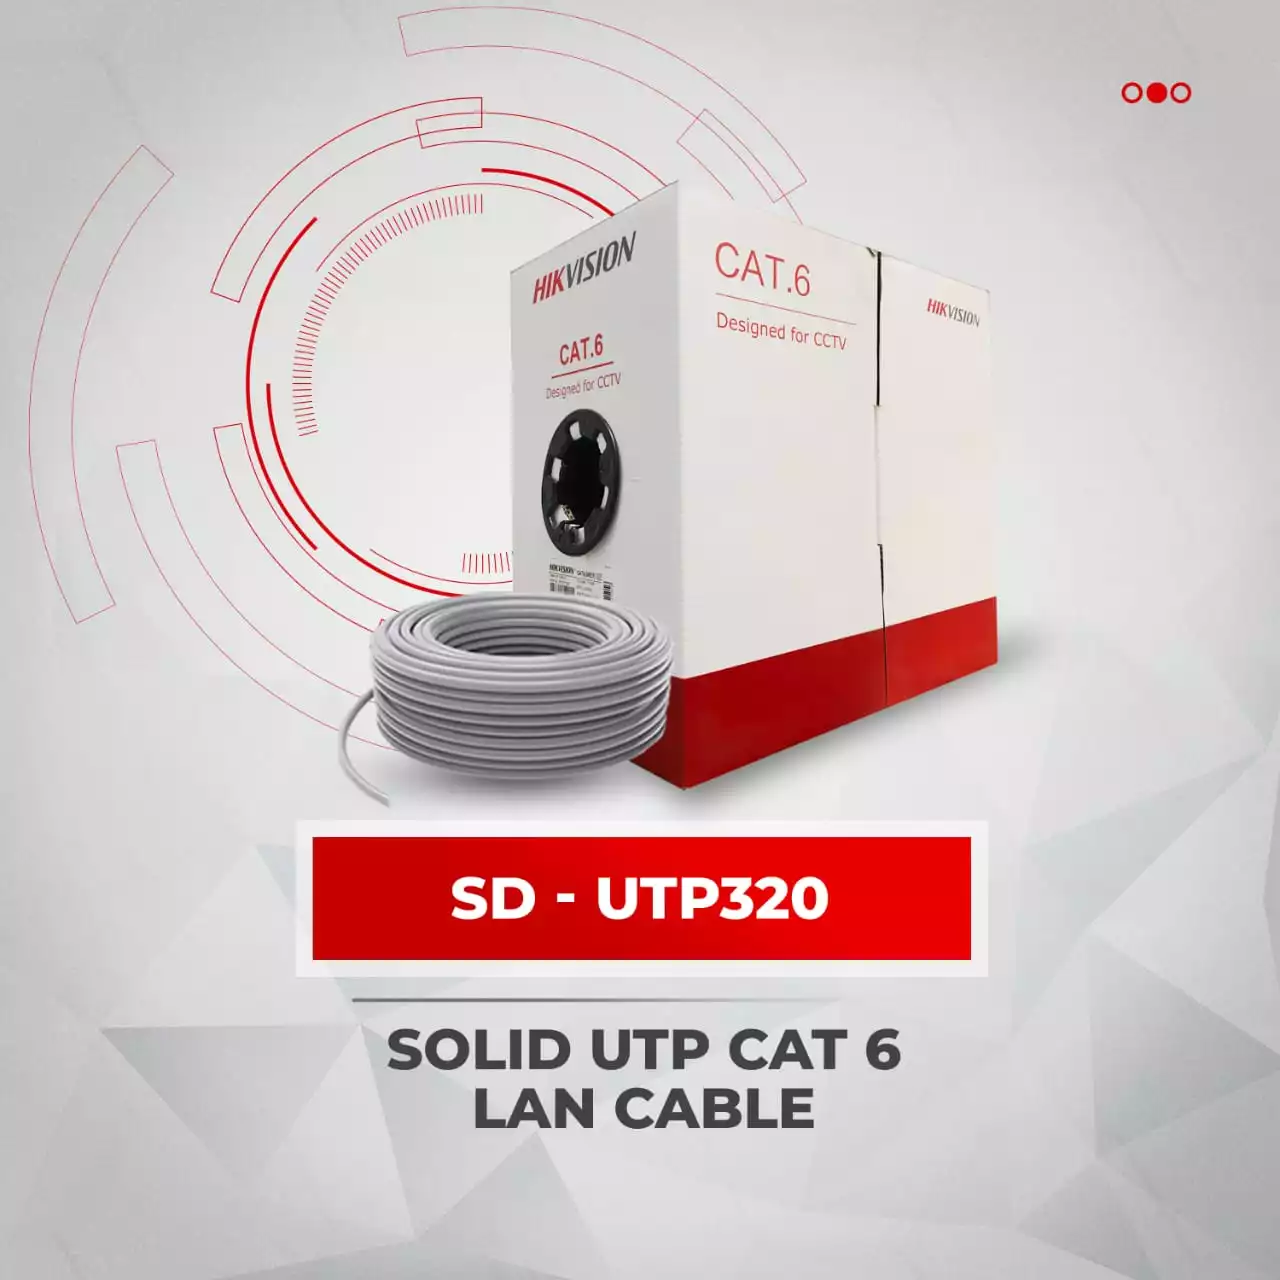 Ds-1ln6-uu hikvision cat6 network cable cat 6-utp (outdoor)